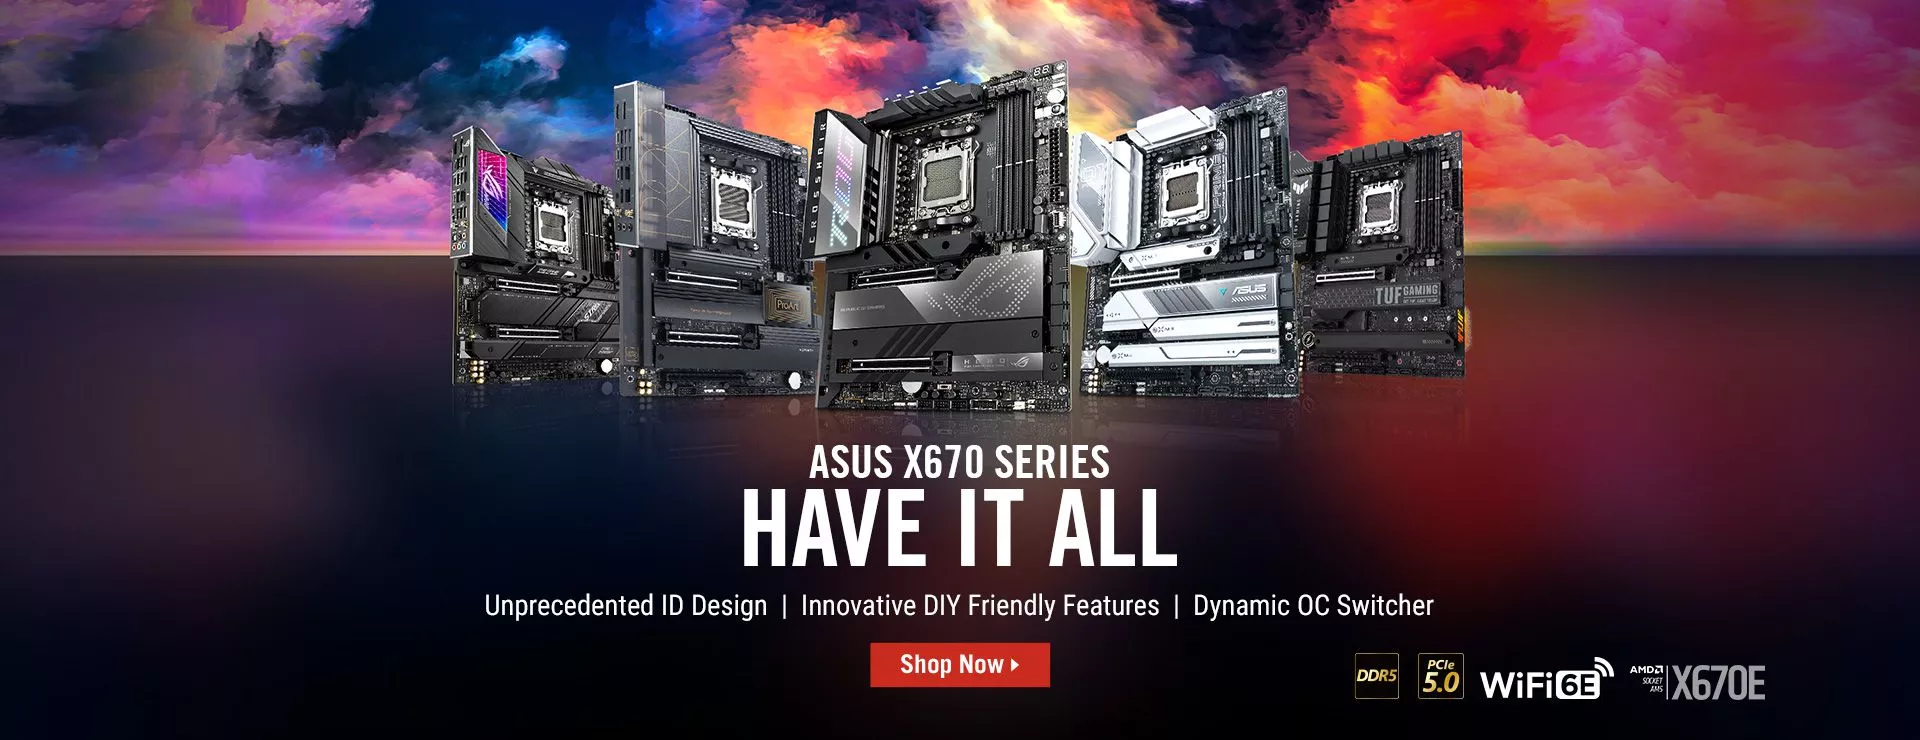 Five ASUS X670 motherboards from ROG Strix, TUF, ProArt and Prime lines float in sunset with DDR5, PCIe 5.0, Wi-Fi 6E logos.